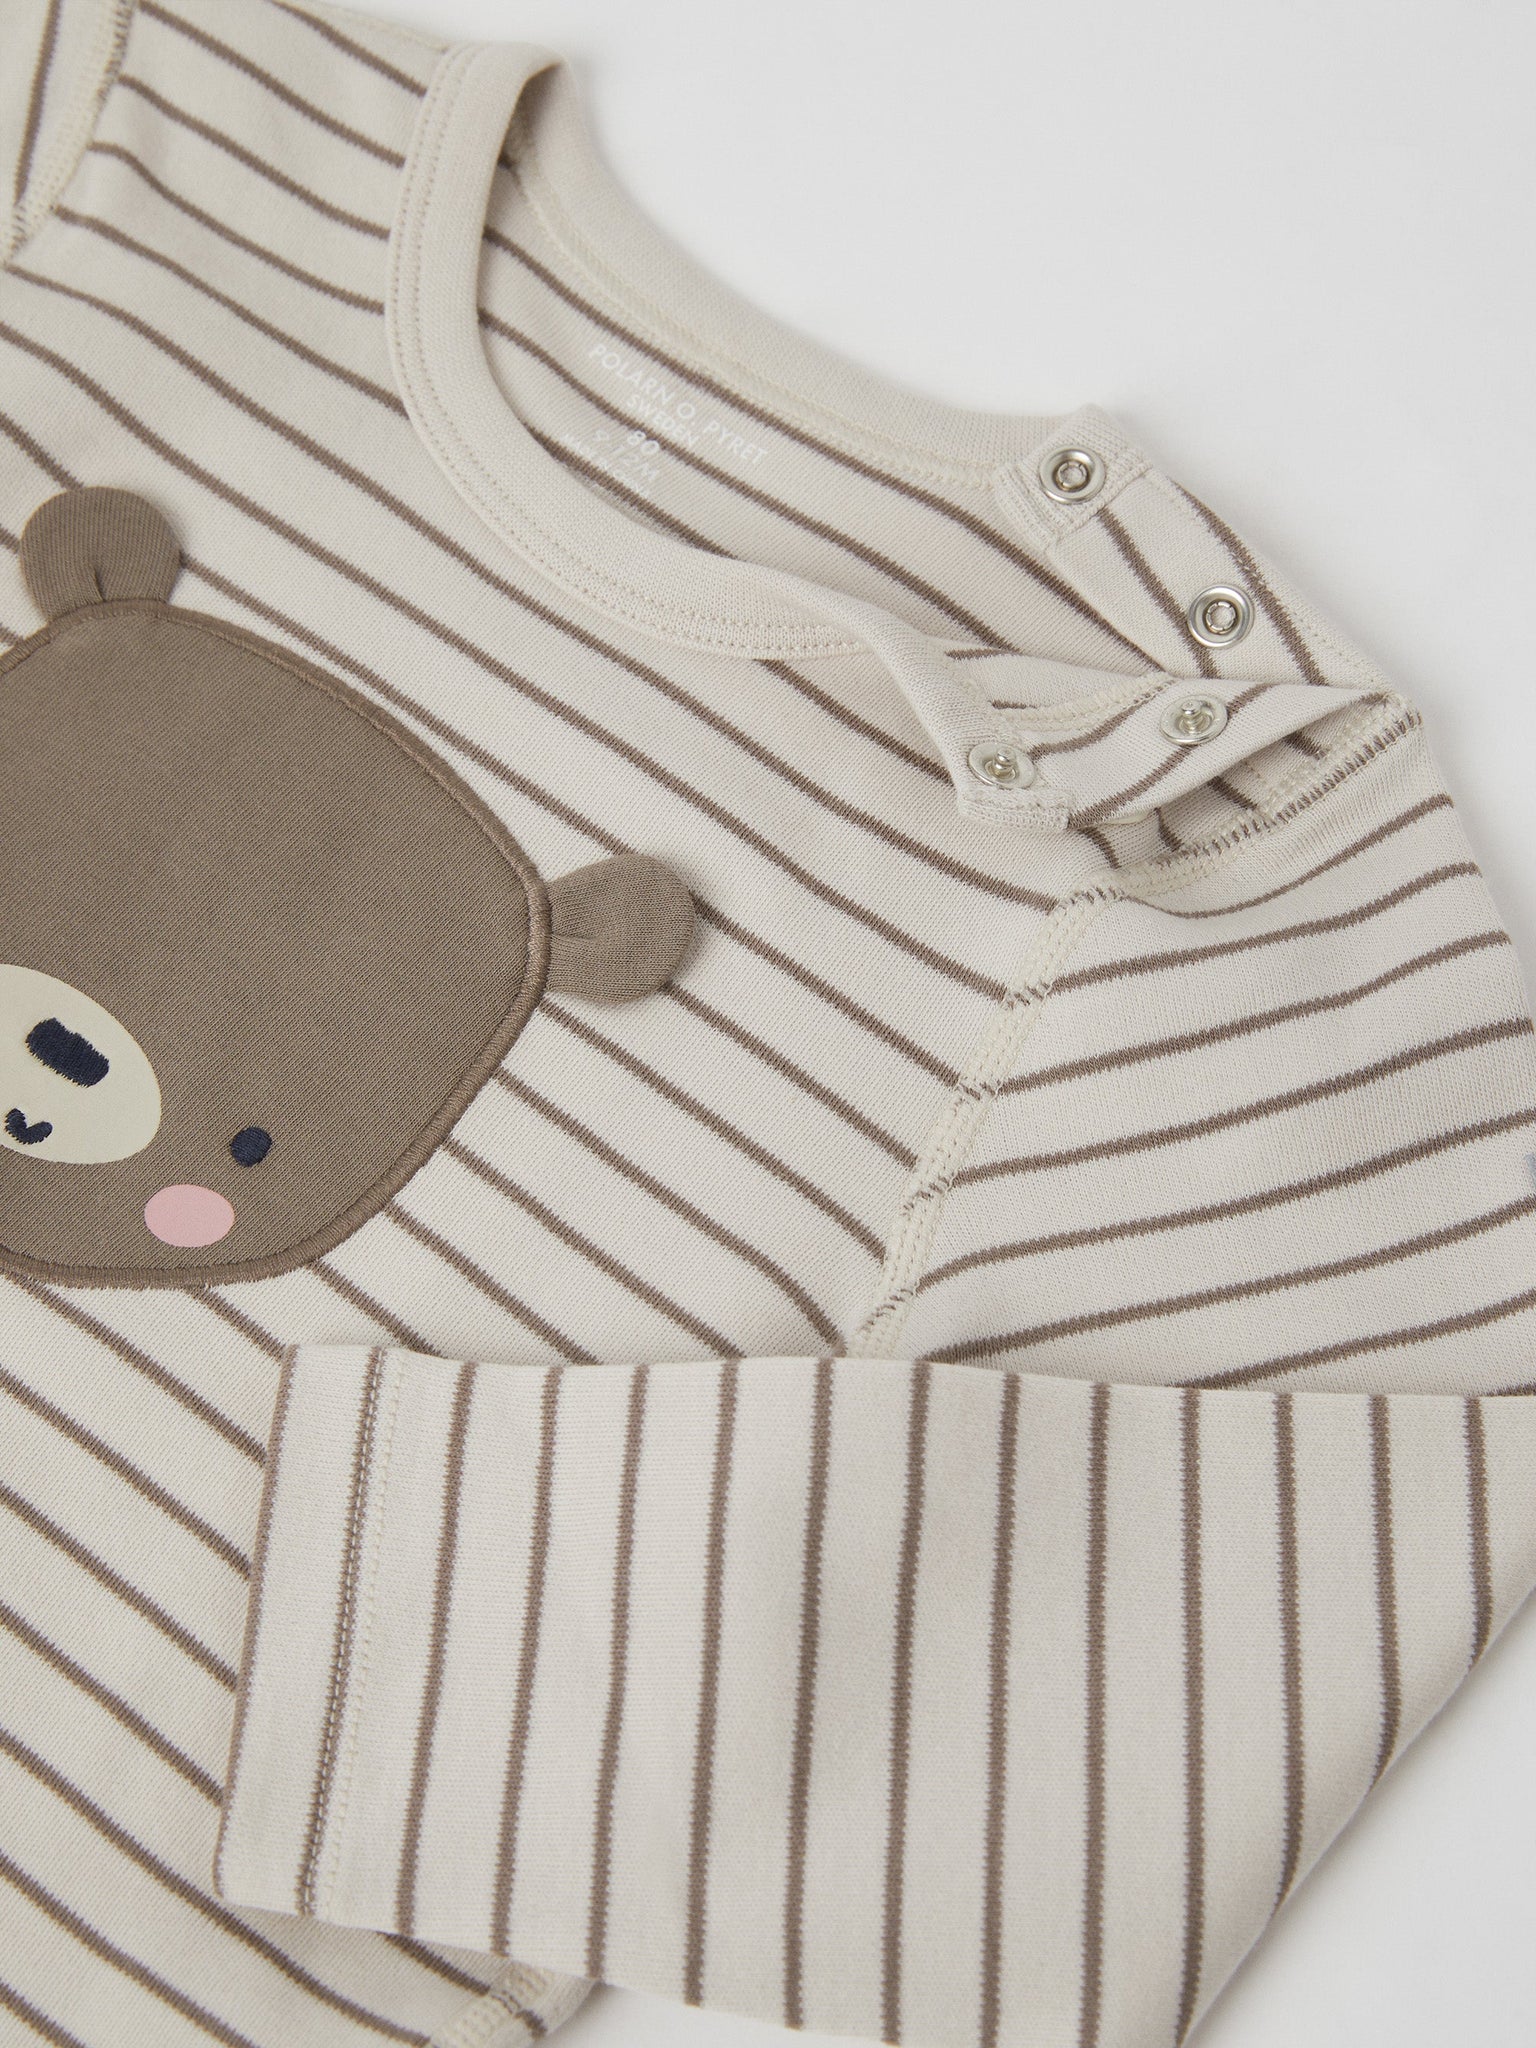 Bear Print Organic Cotton Baby Top from the Polarn O. Pyret baby collection. Made using 100% GOTS Organic Cotton